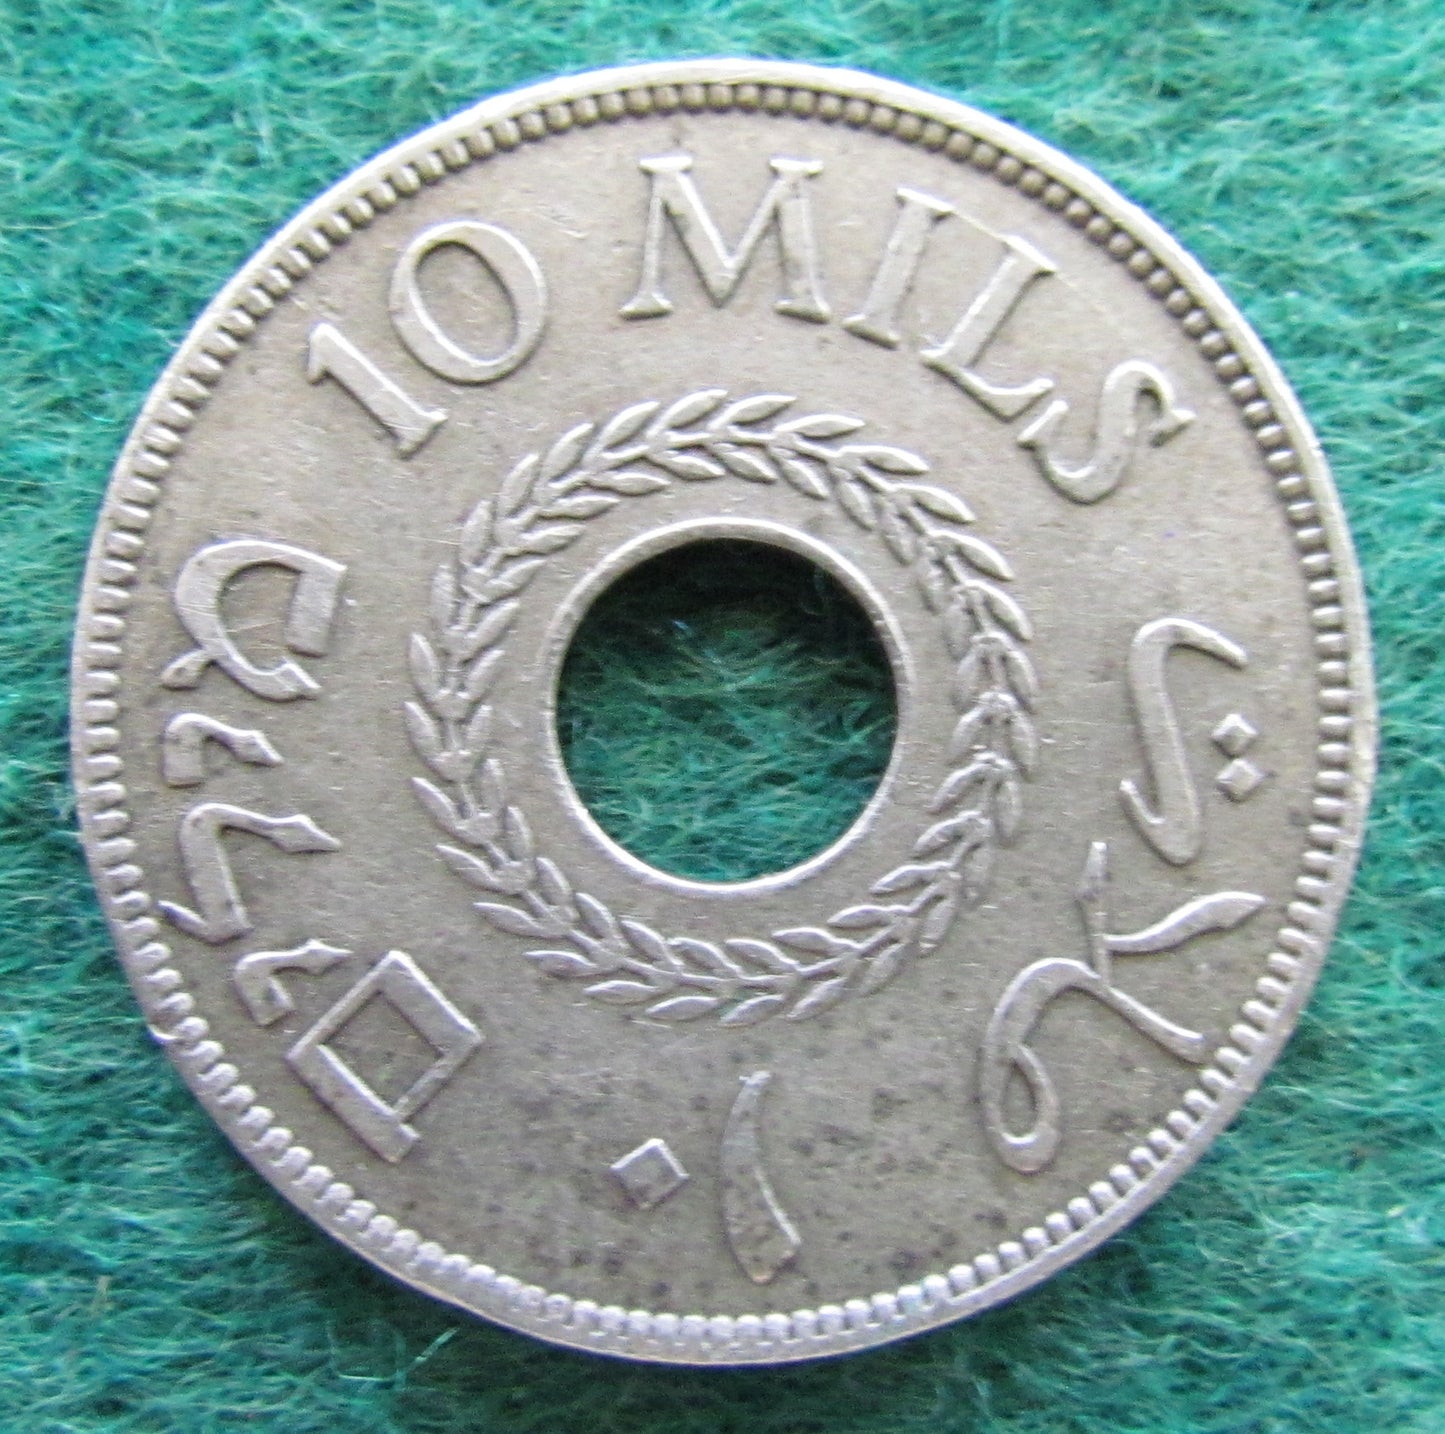 Palestine 1927 20 Milliemes Coin - Circulated